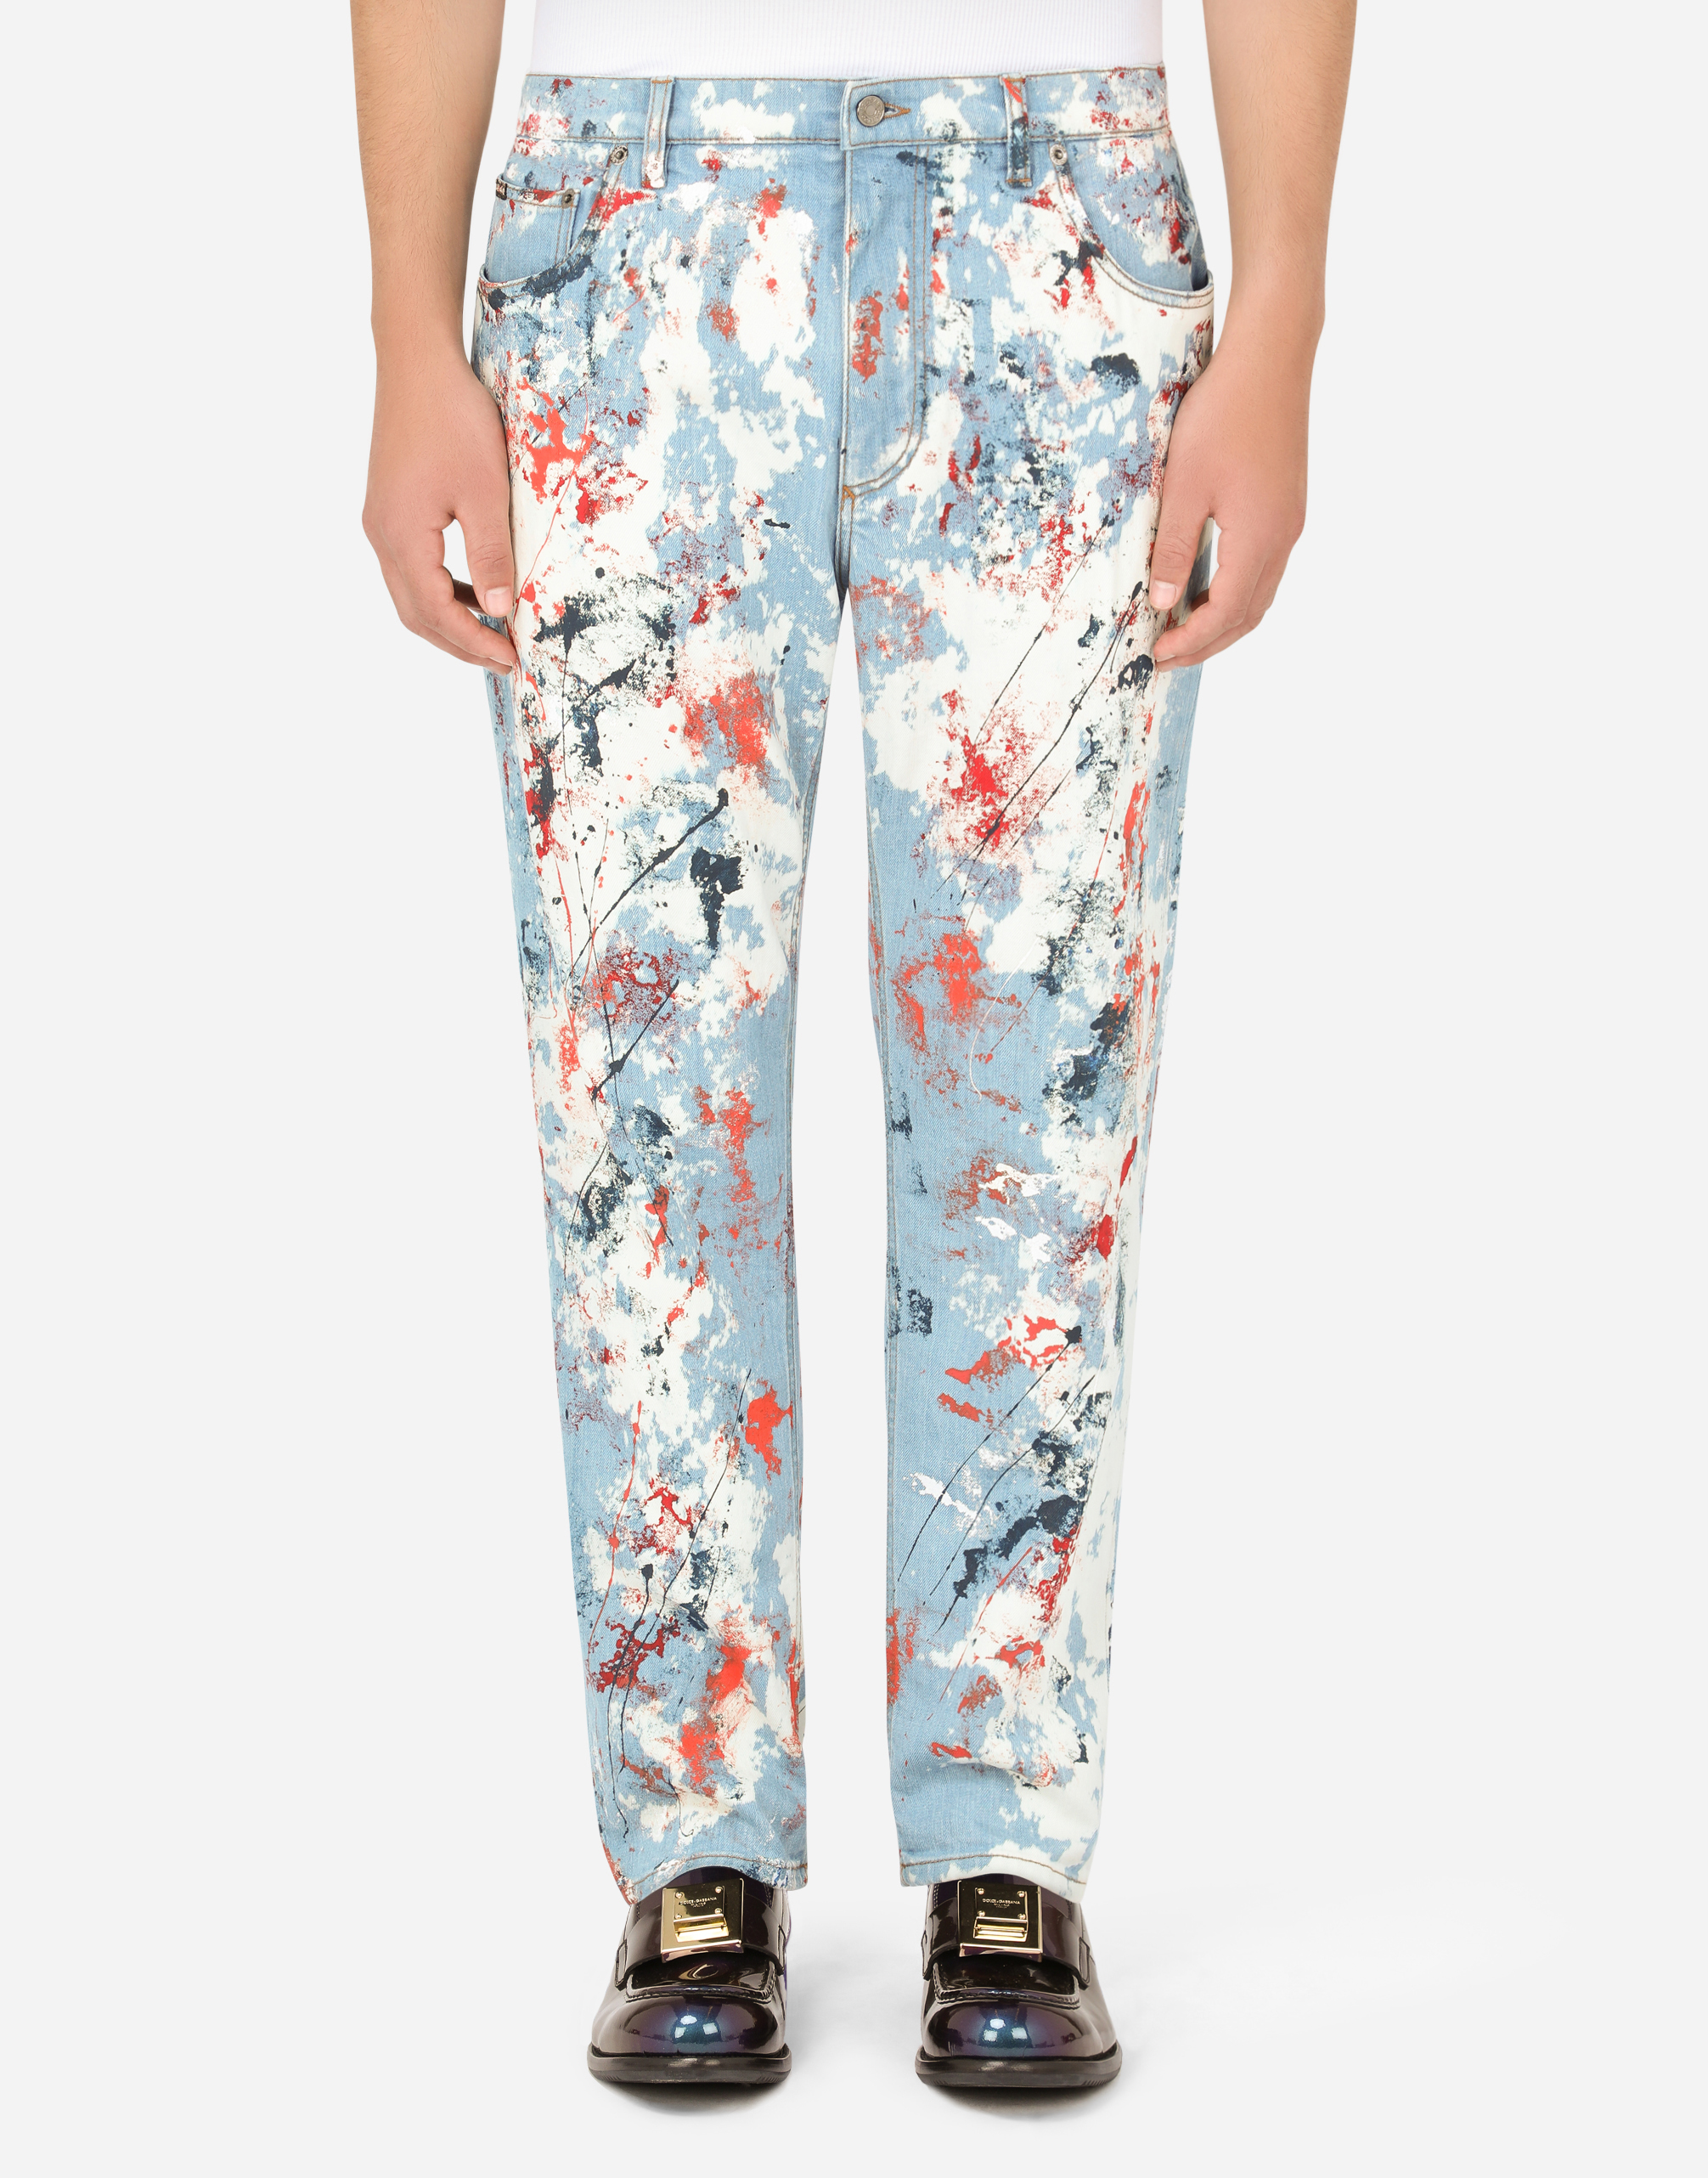 Loose light blue jeans with marbled print in Multicolor